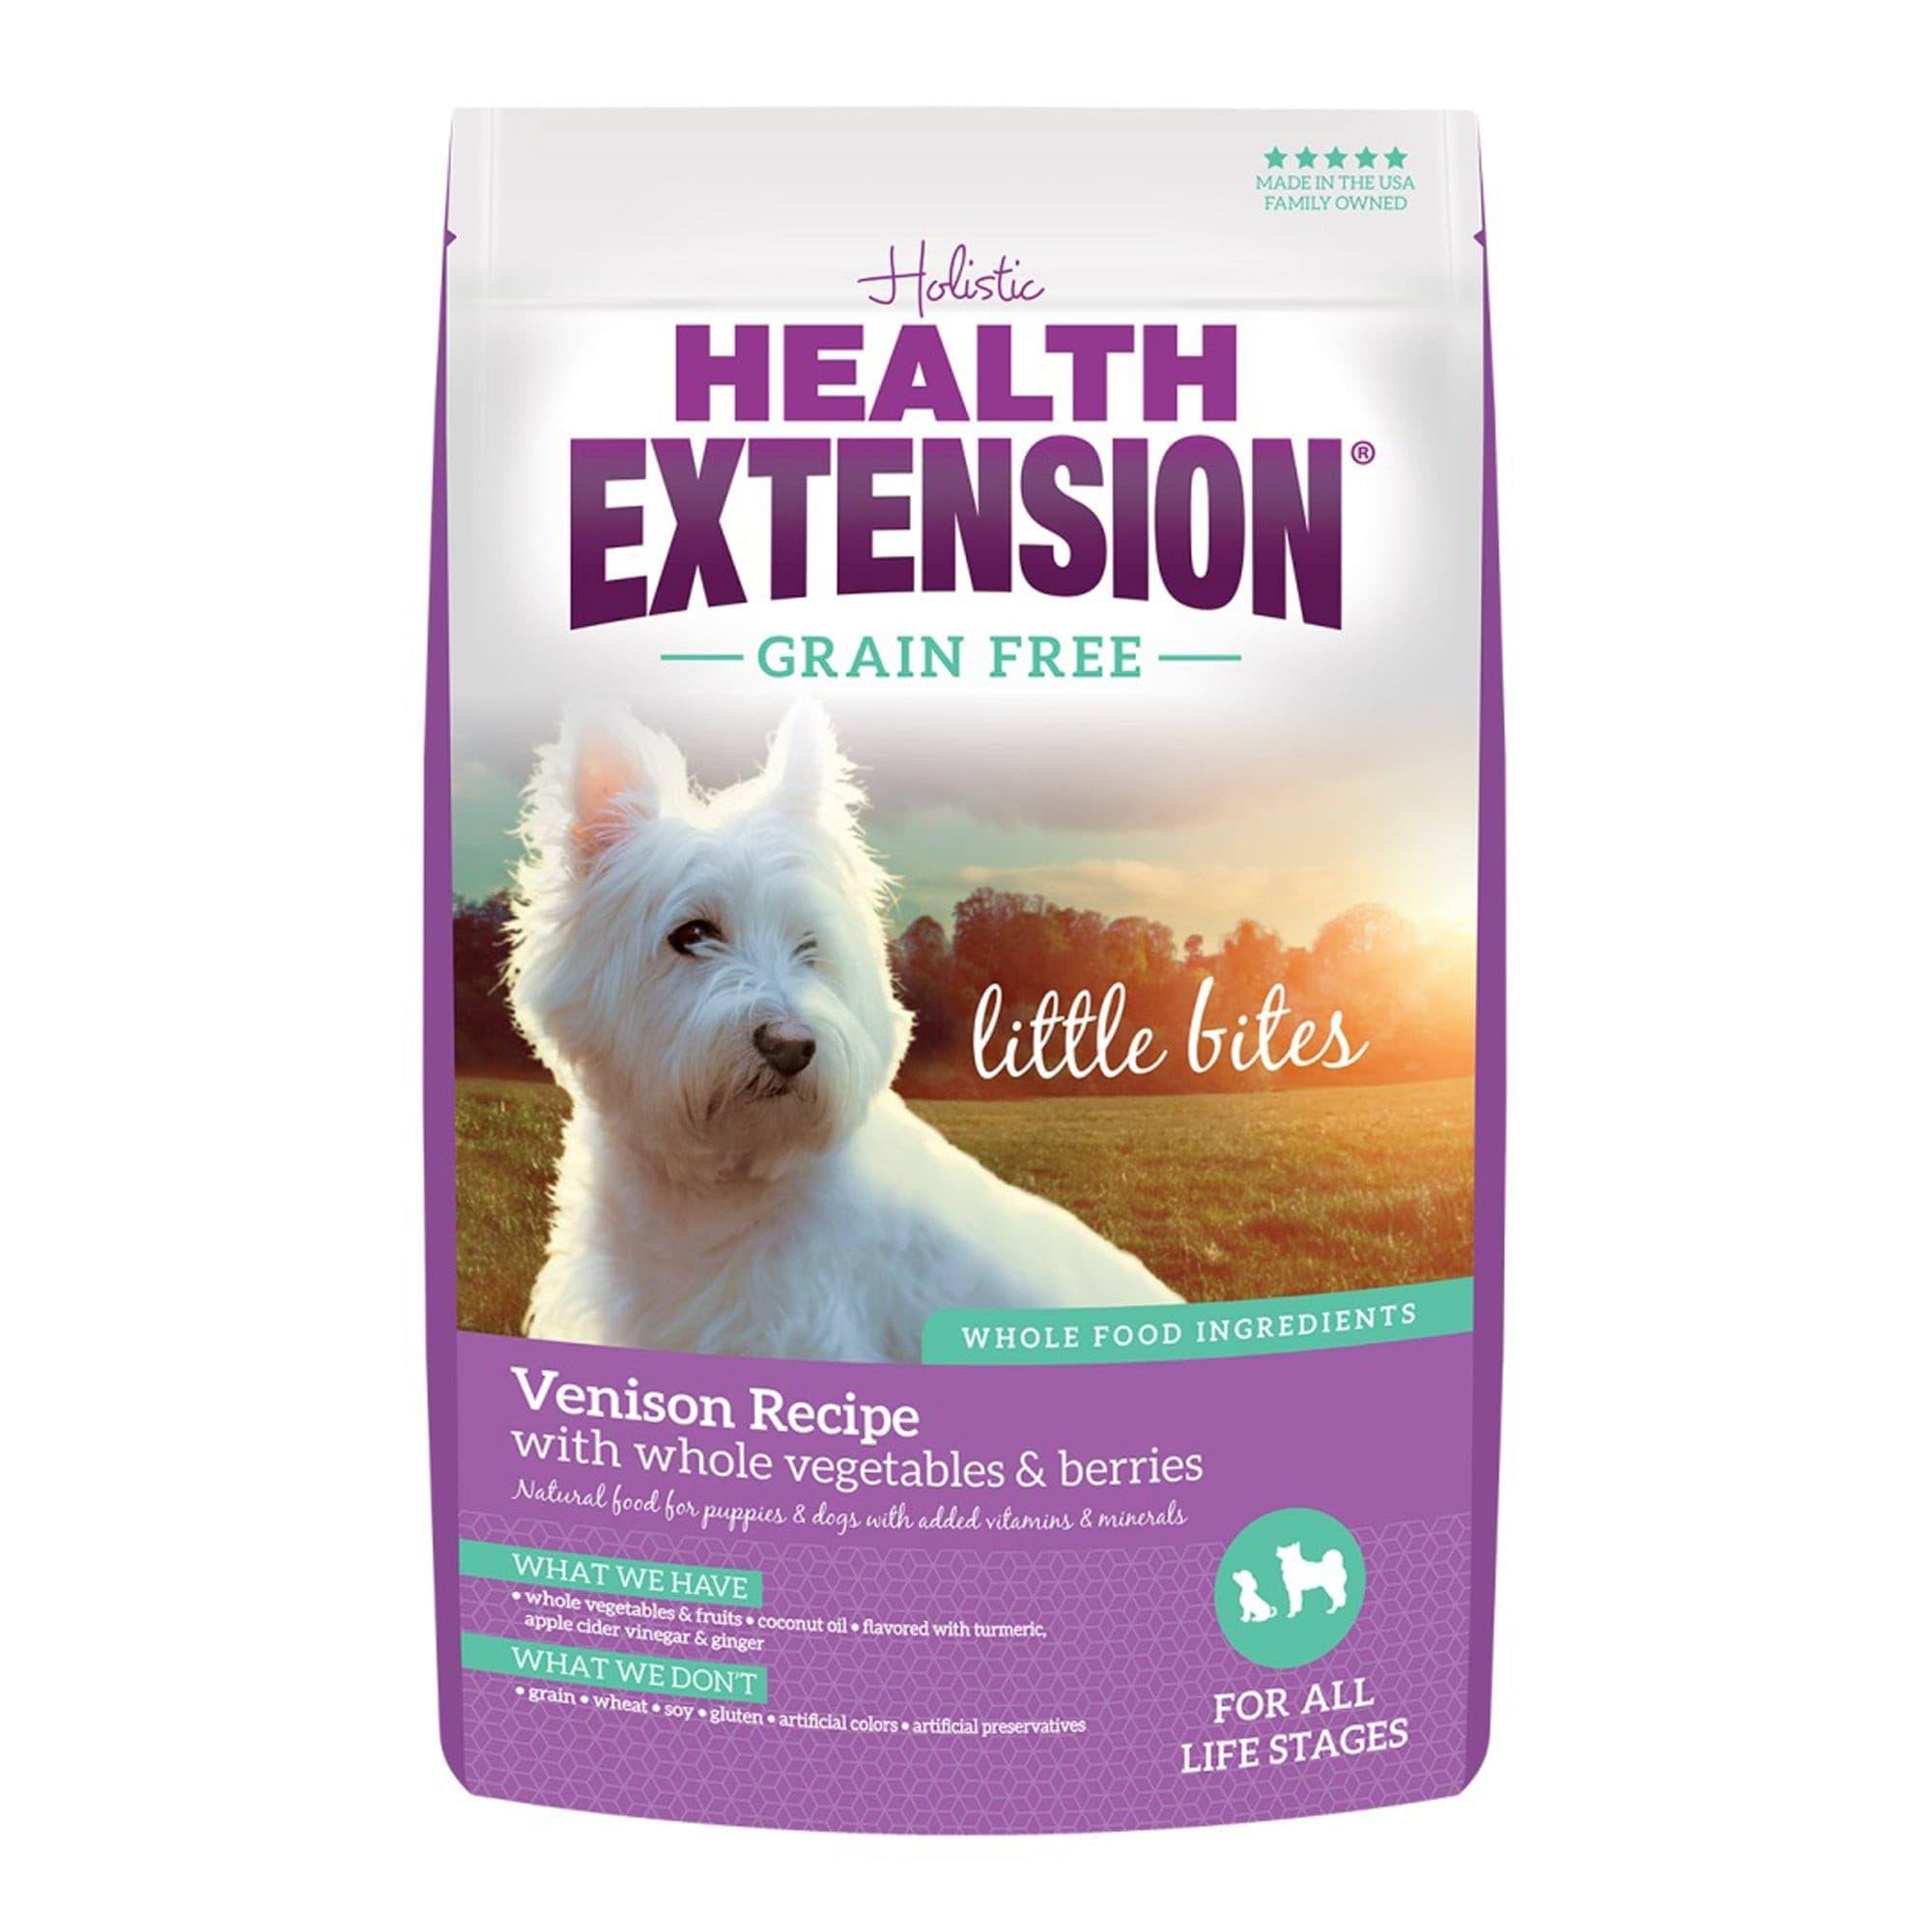 Health Extension Little Bites Grain-Free Venison Recipe All Life Stages Dry Dog Food